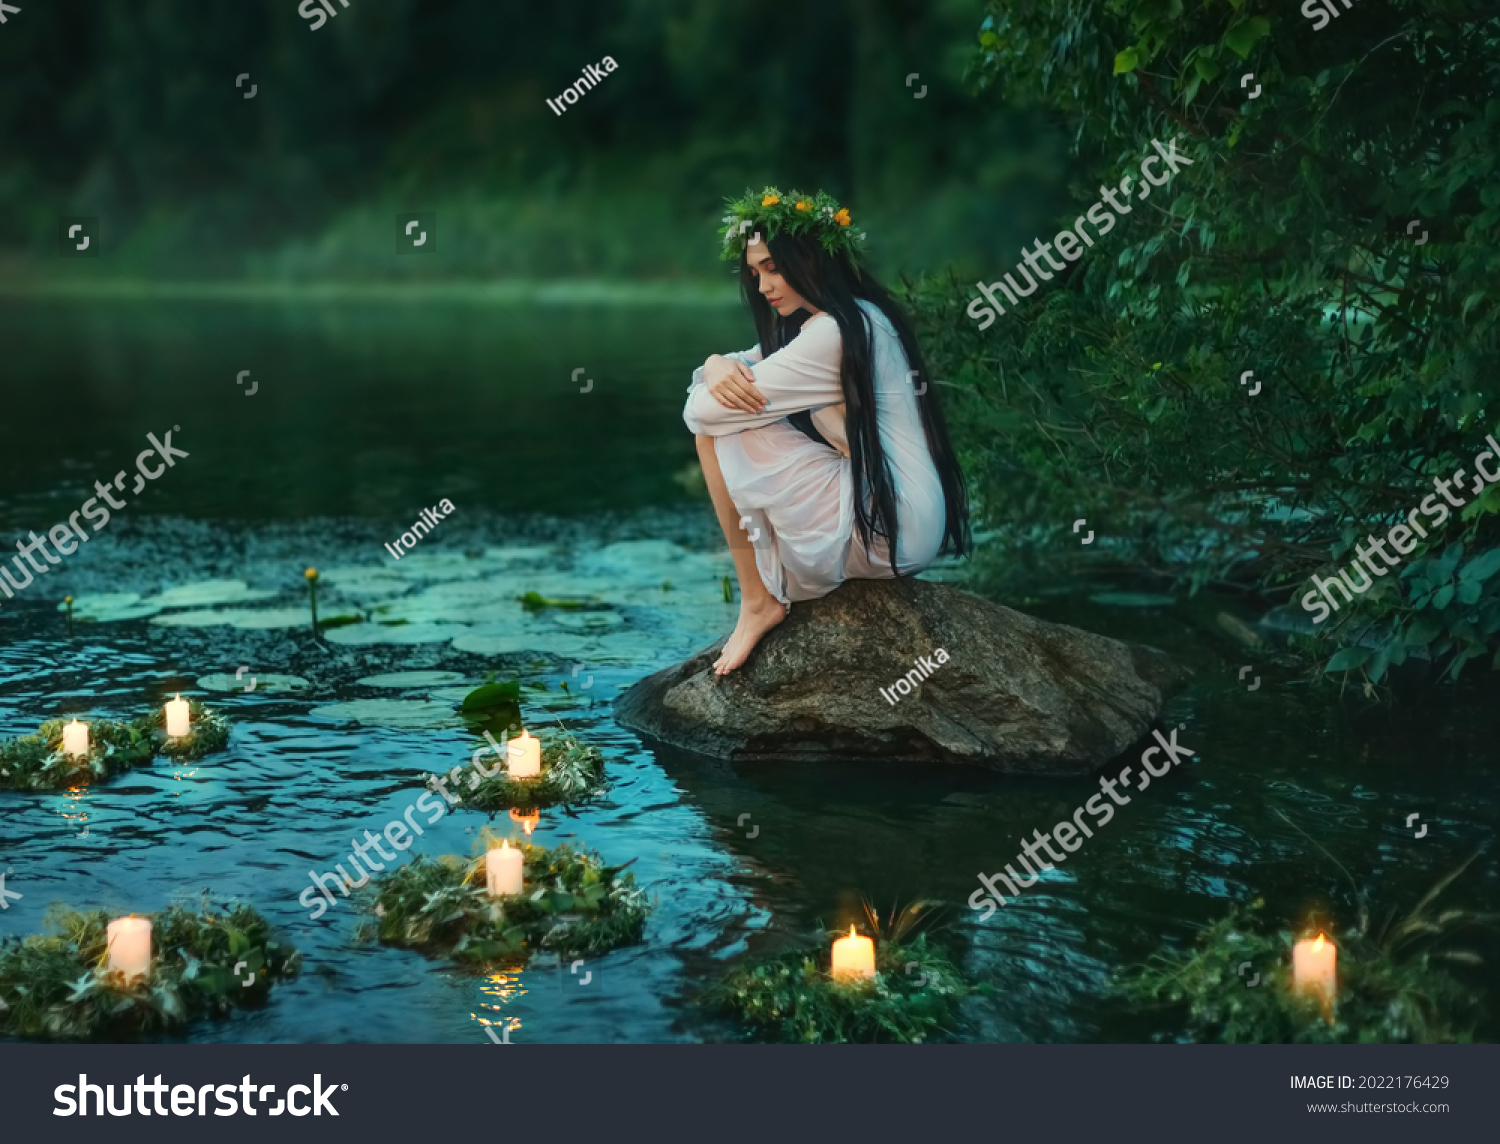 Slavic girl sits on stone on shore lake. Nymph fantasy woman hugs knees. Long black hair. Wreaths of grass, flowers float on water. Candles burning. River dusk forest green tree. Riutal of Divination. #2022176429